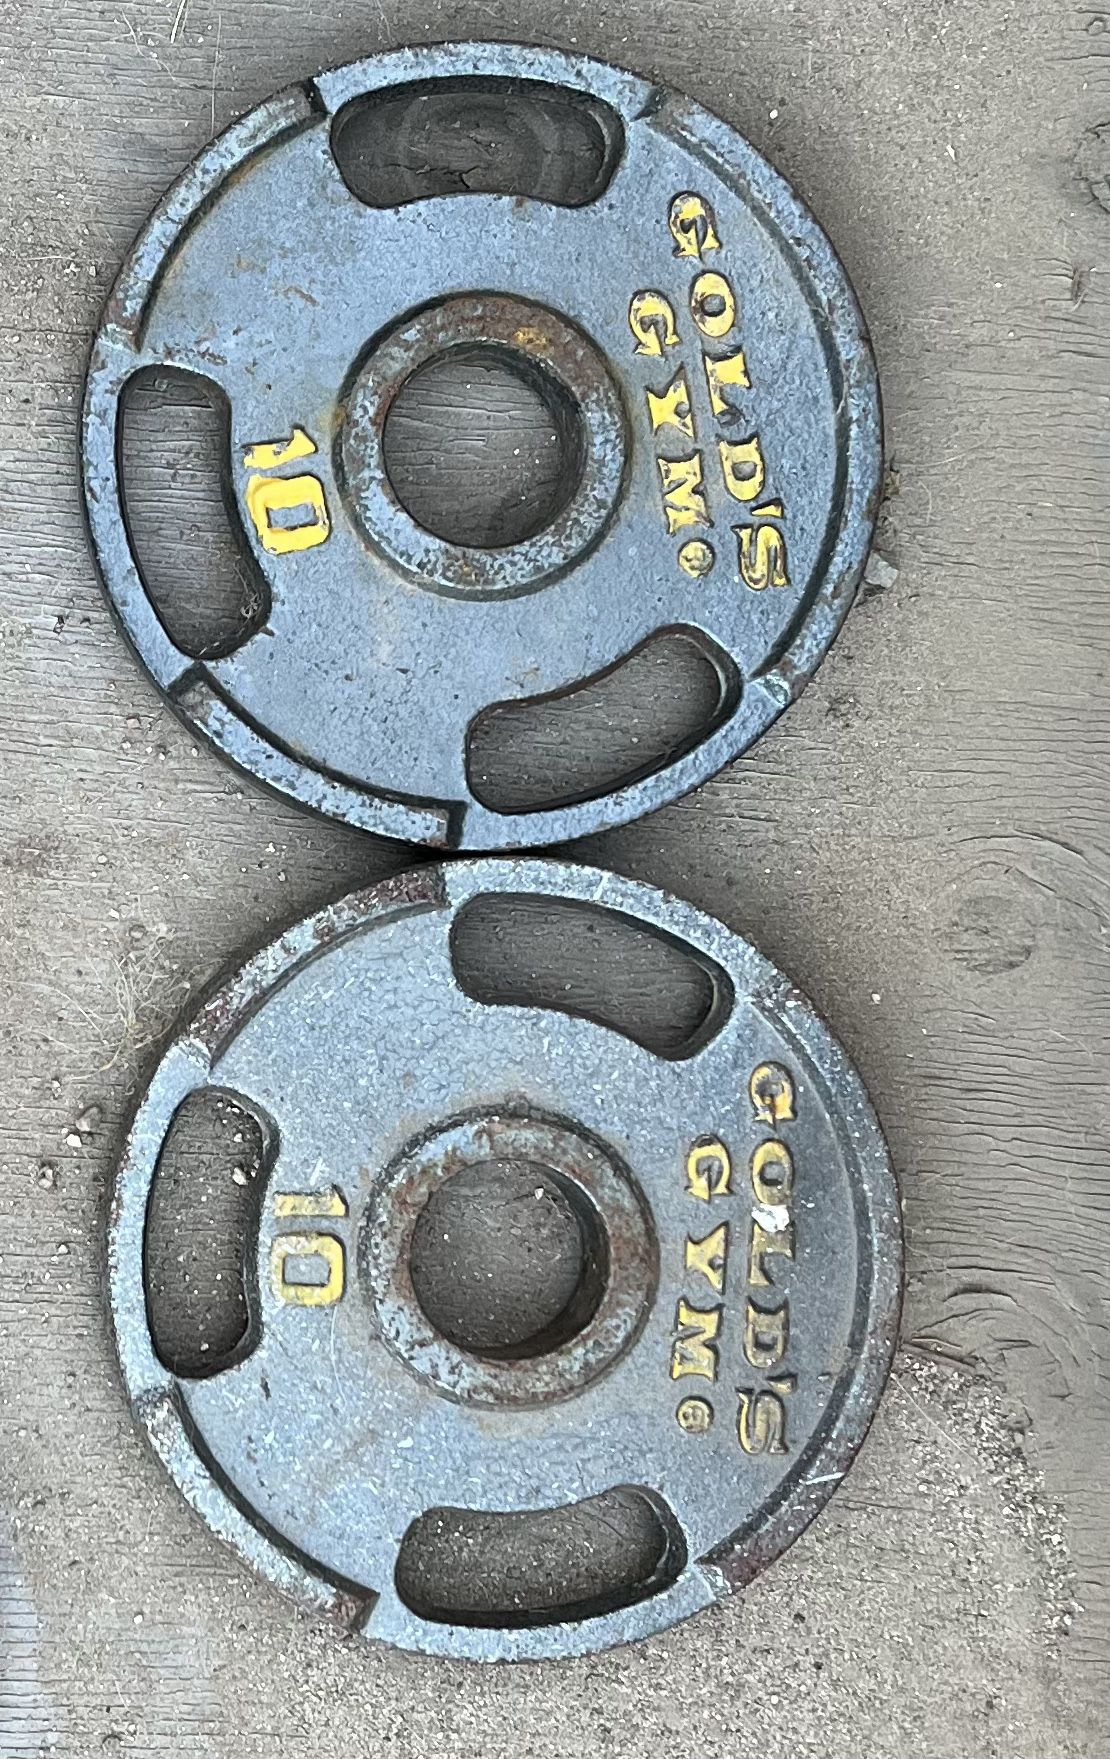 10lbs Weight Lifting Plate